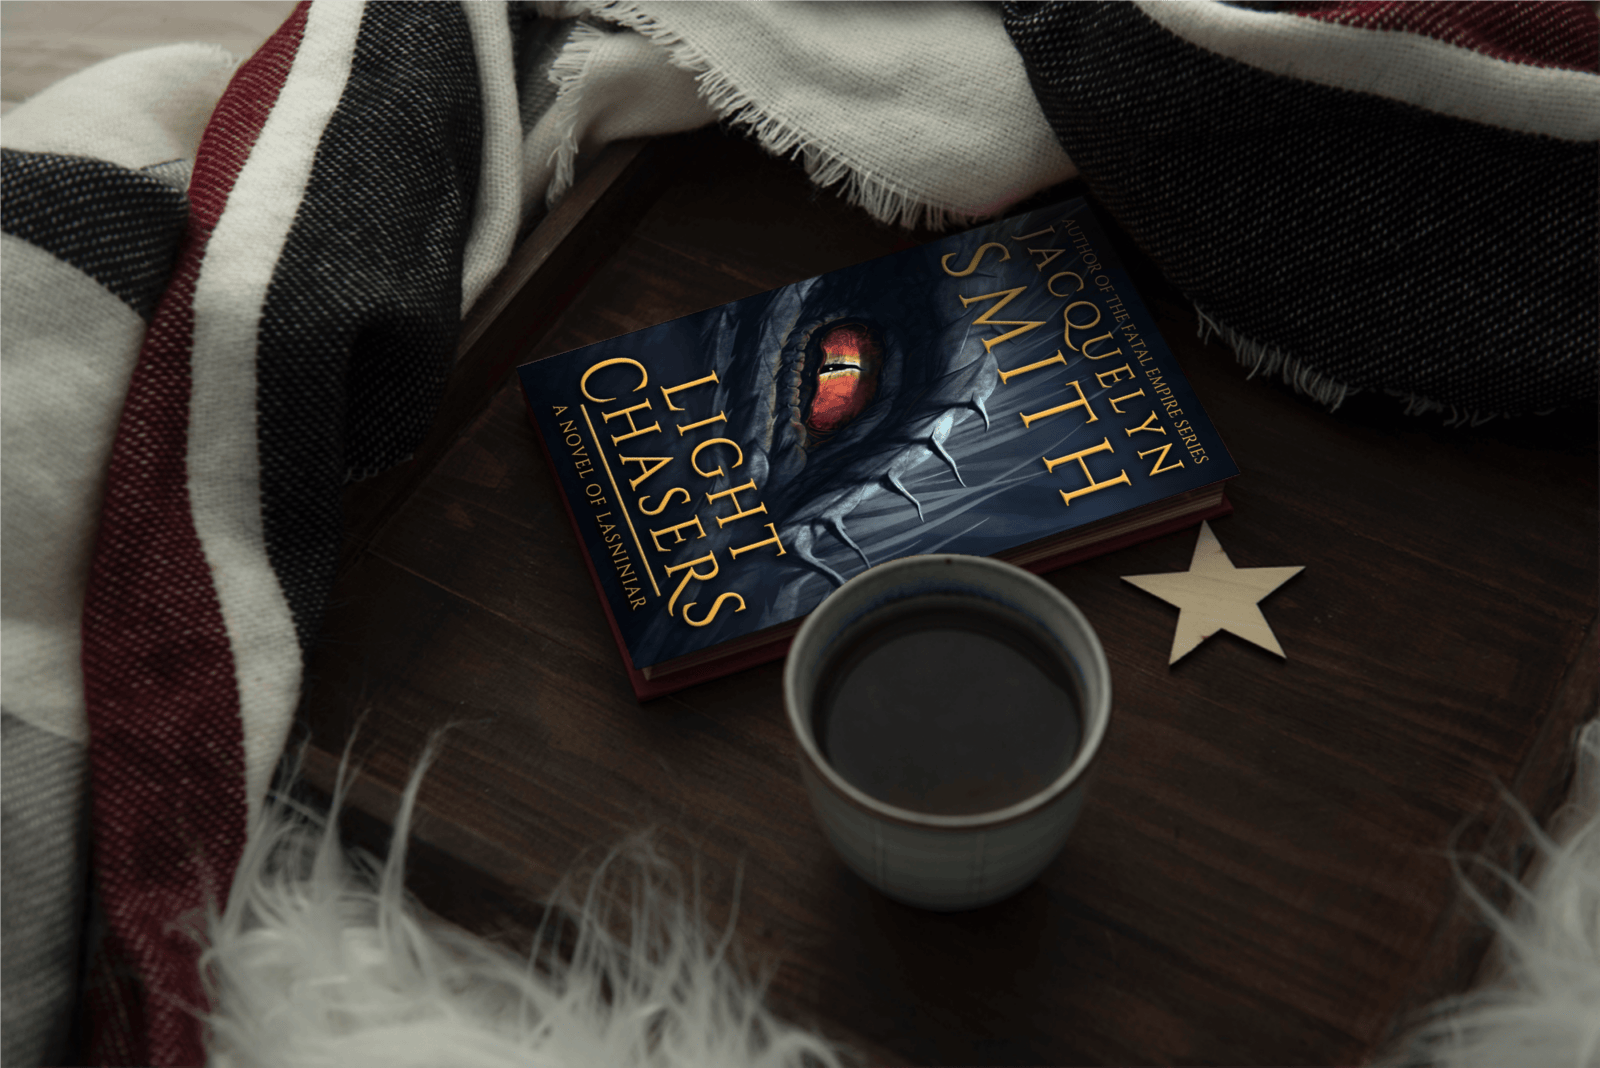 Light Chasers the World of Lasniniar Book 1 paperback with coffee and cozy blankets